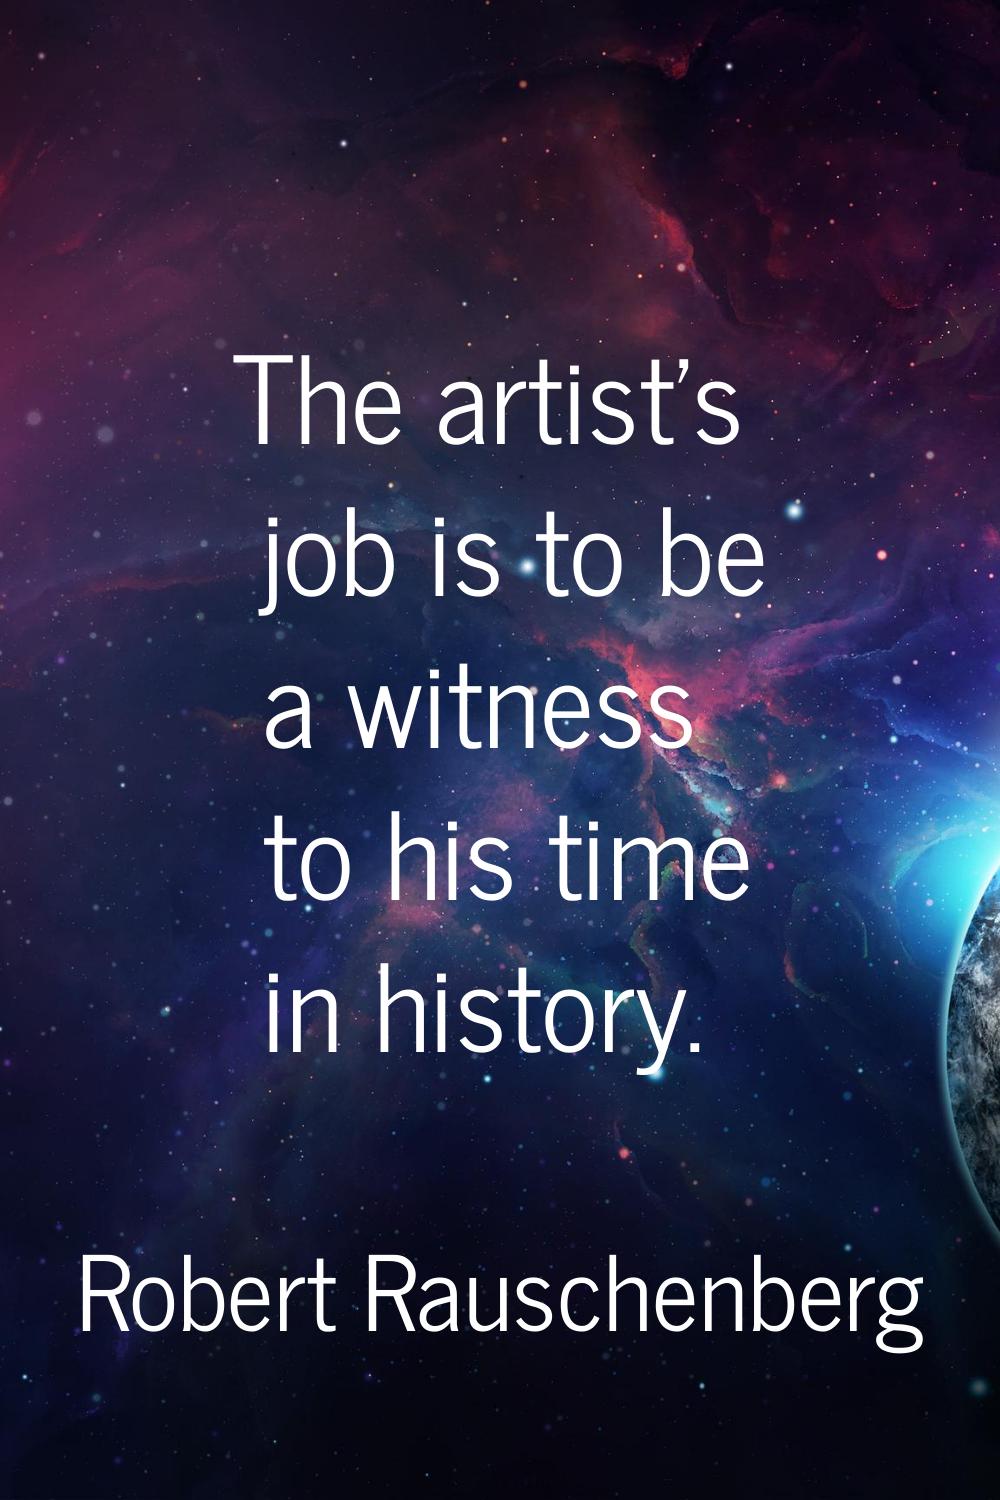 The artist's job is to be a witness to his time in history.